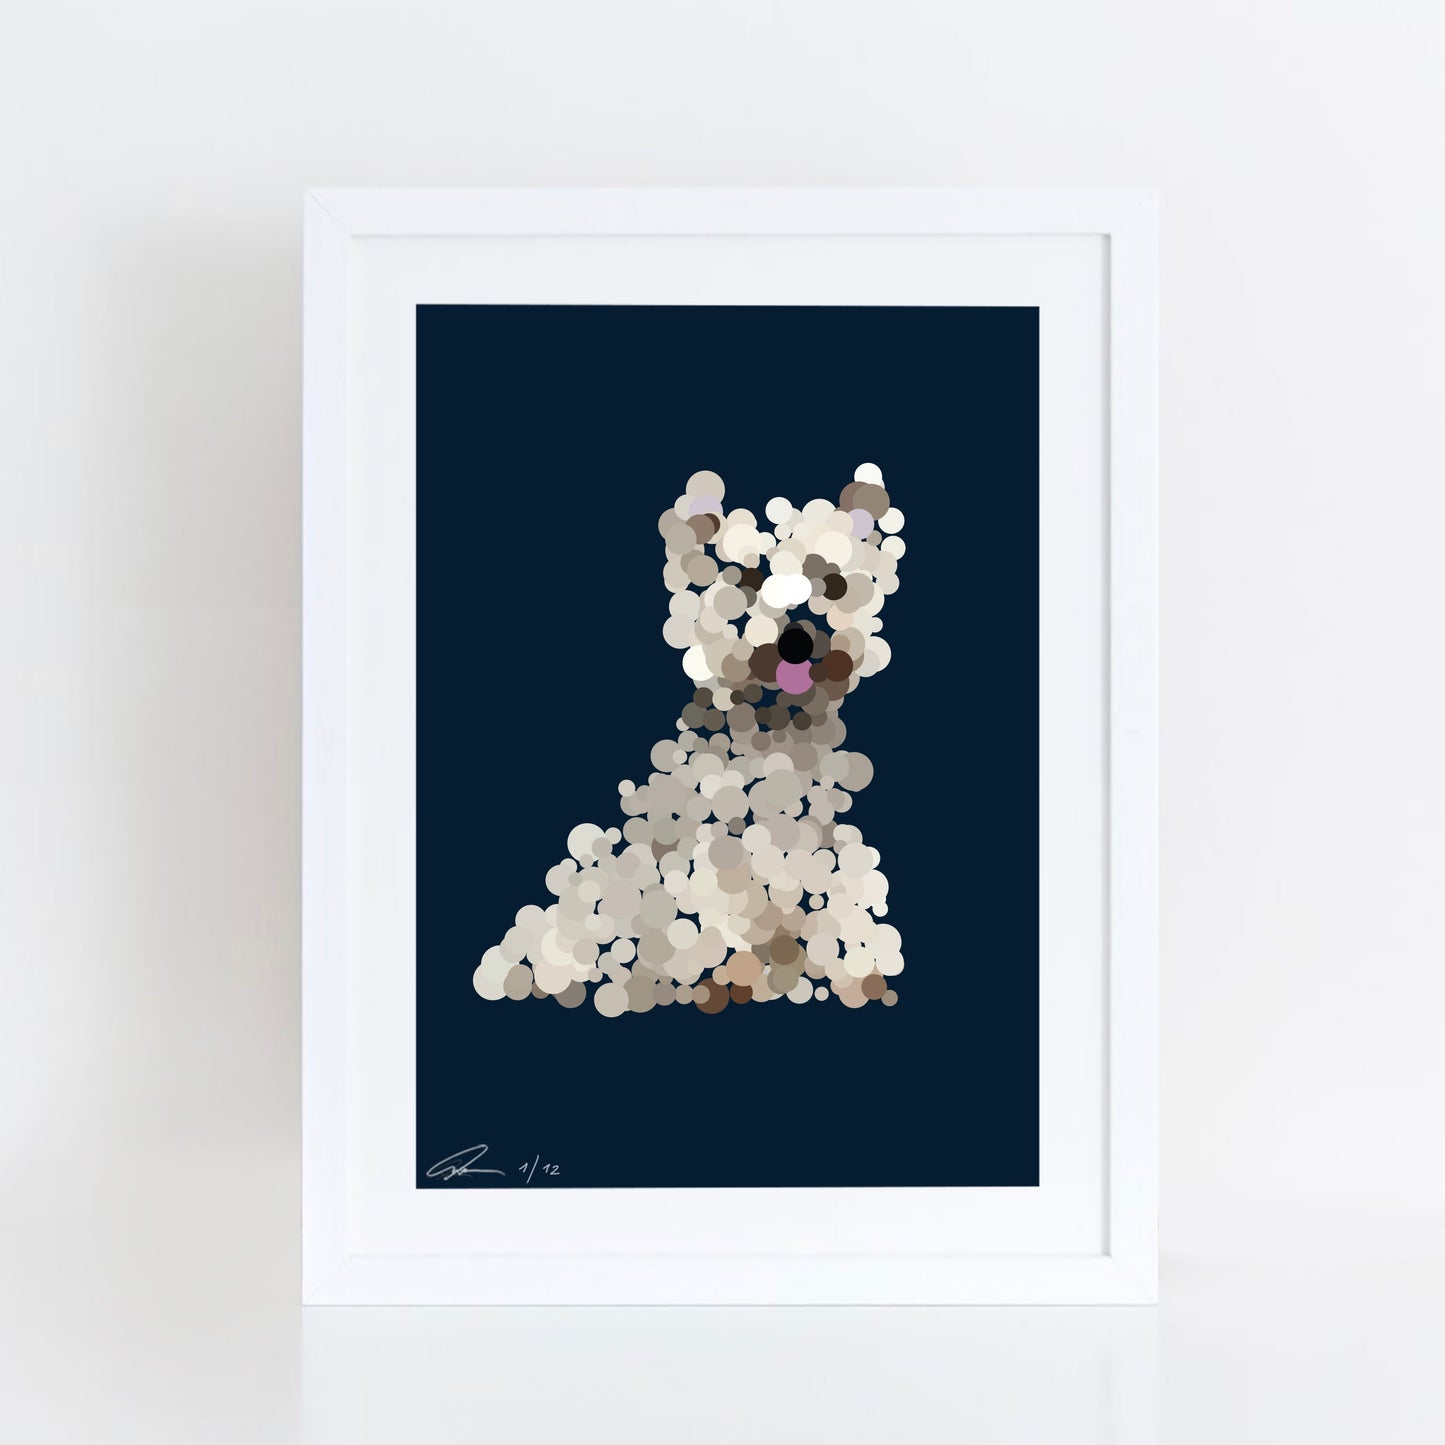 Pointillist happy life-size dogs showing their tongues